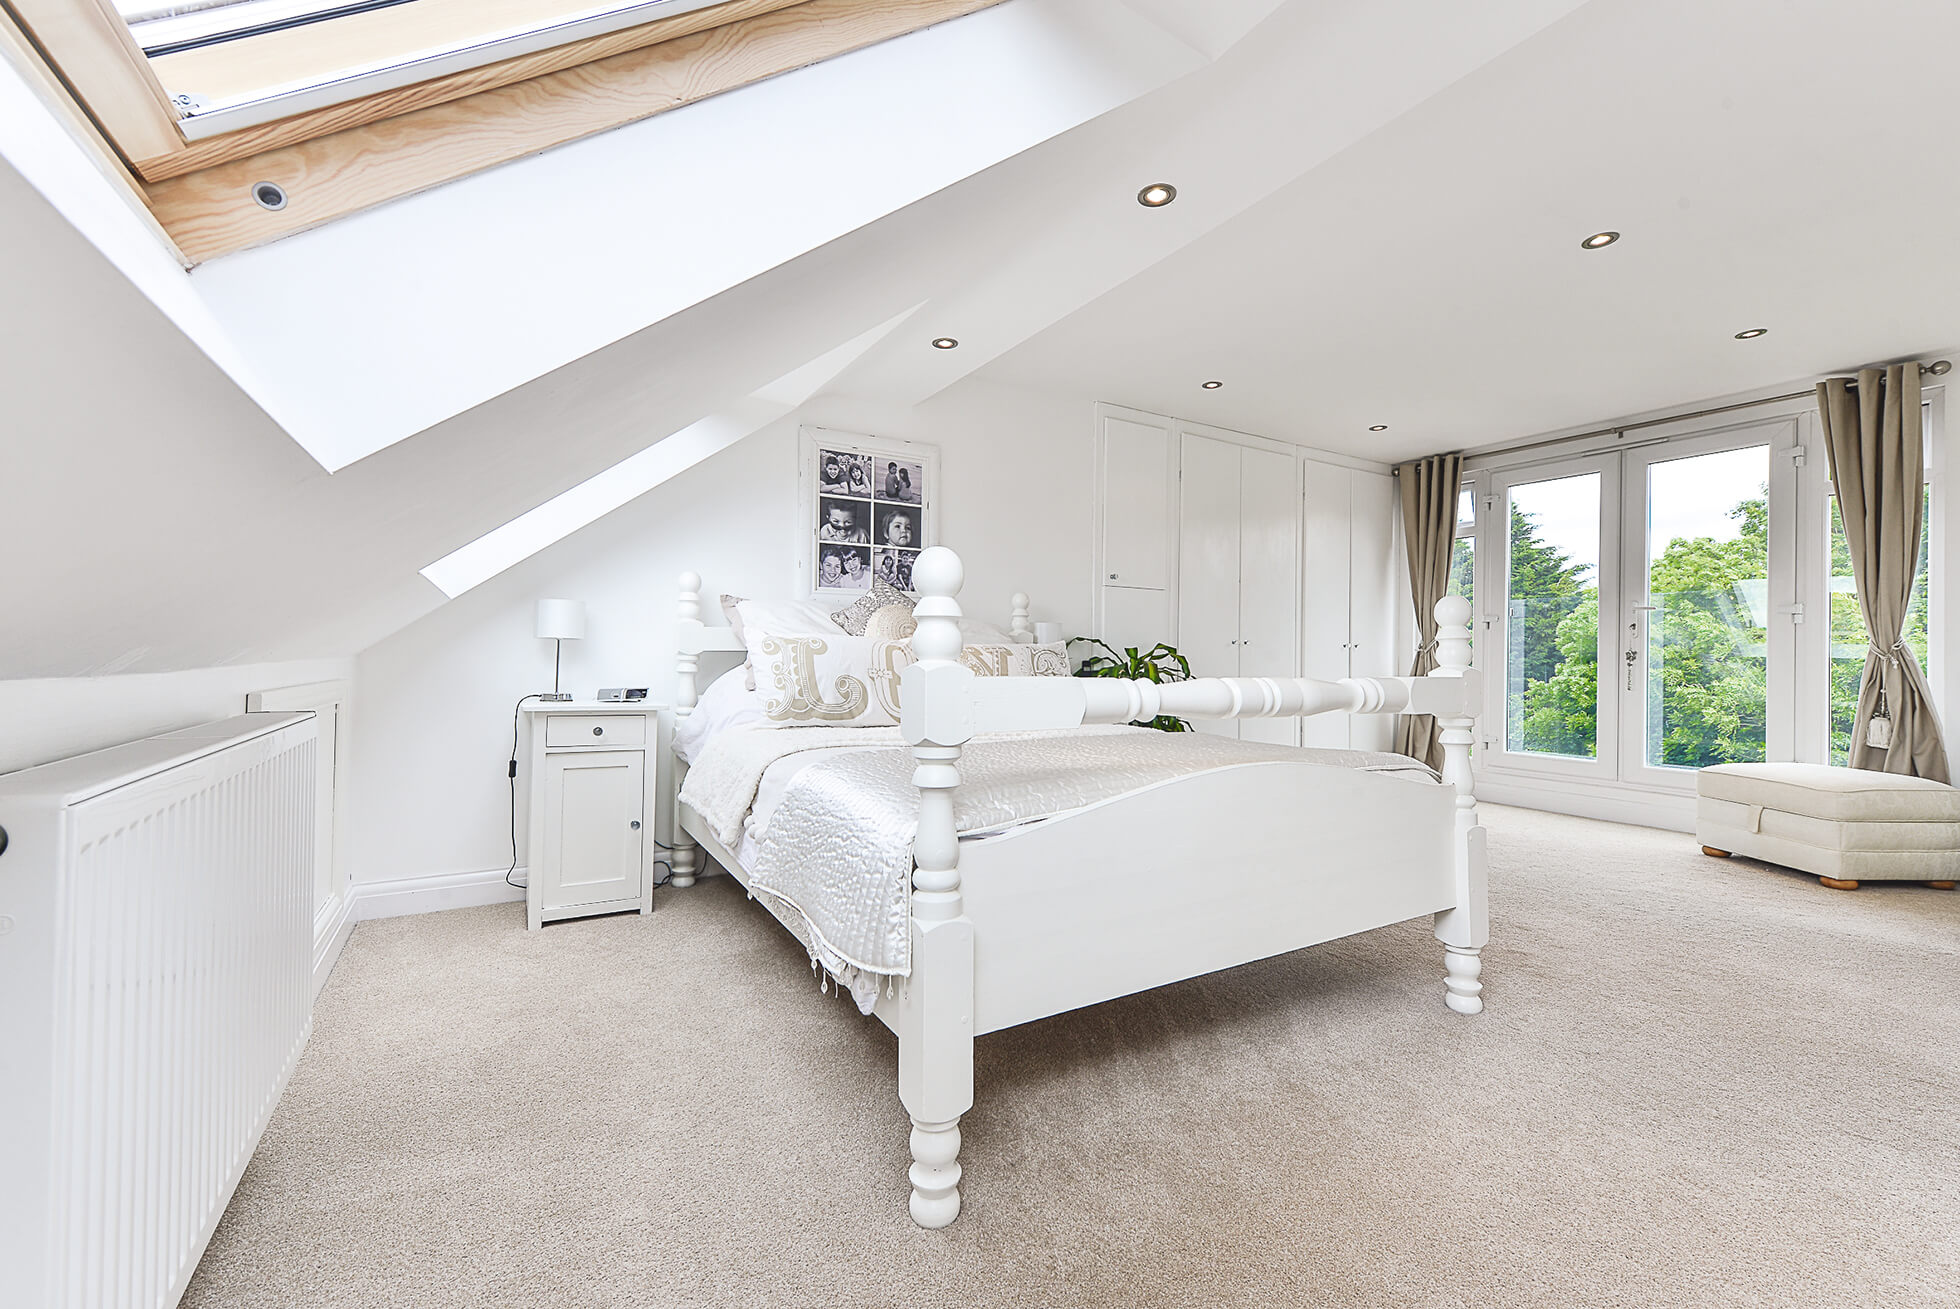 Do you have a question about converting your Loft in Braughing? Here are the most popular questions asked by our clients.